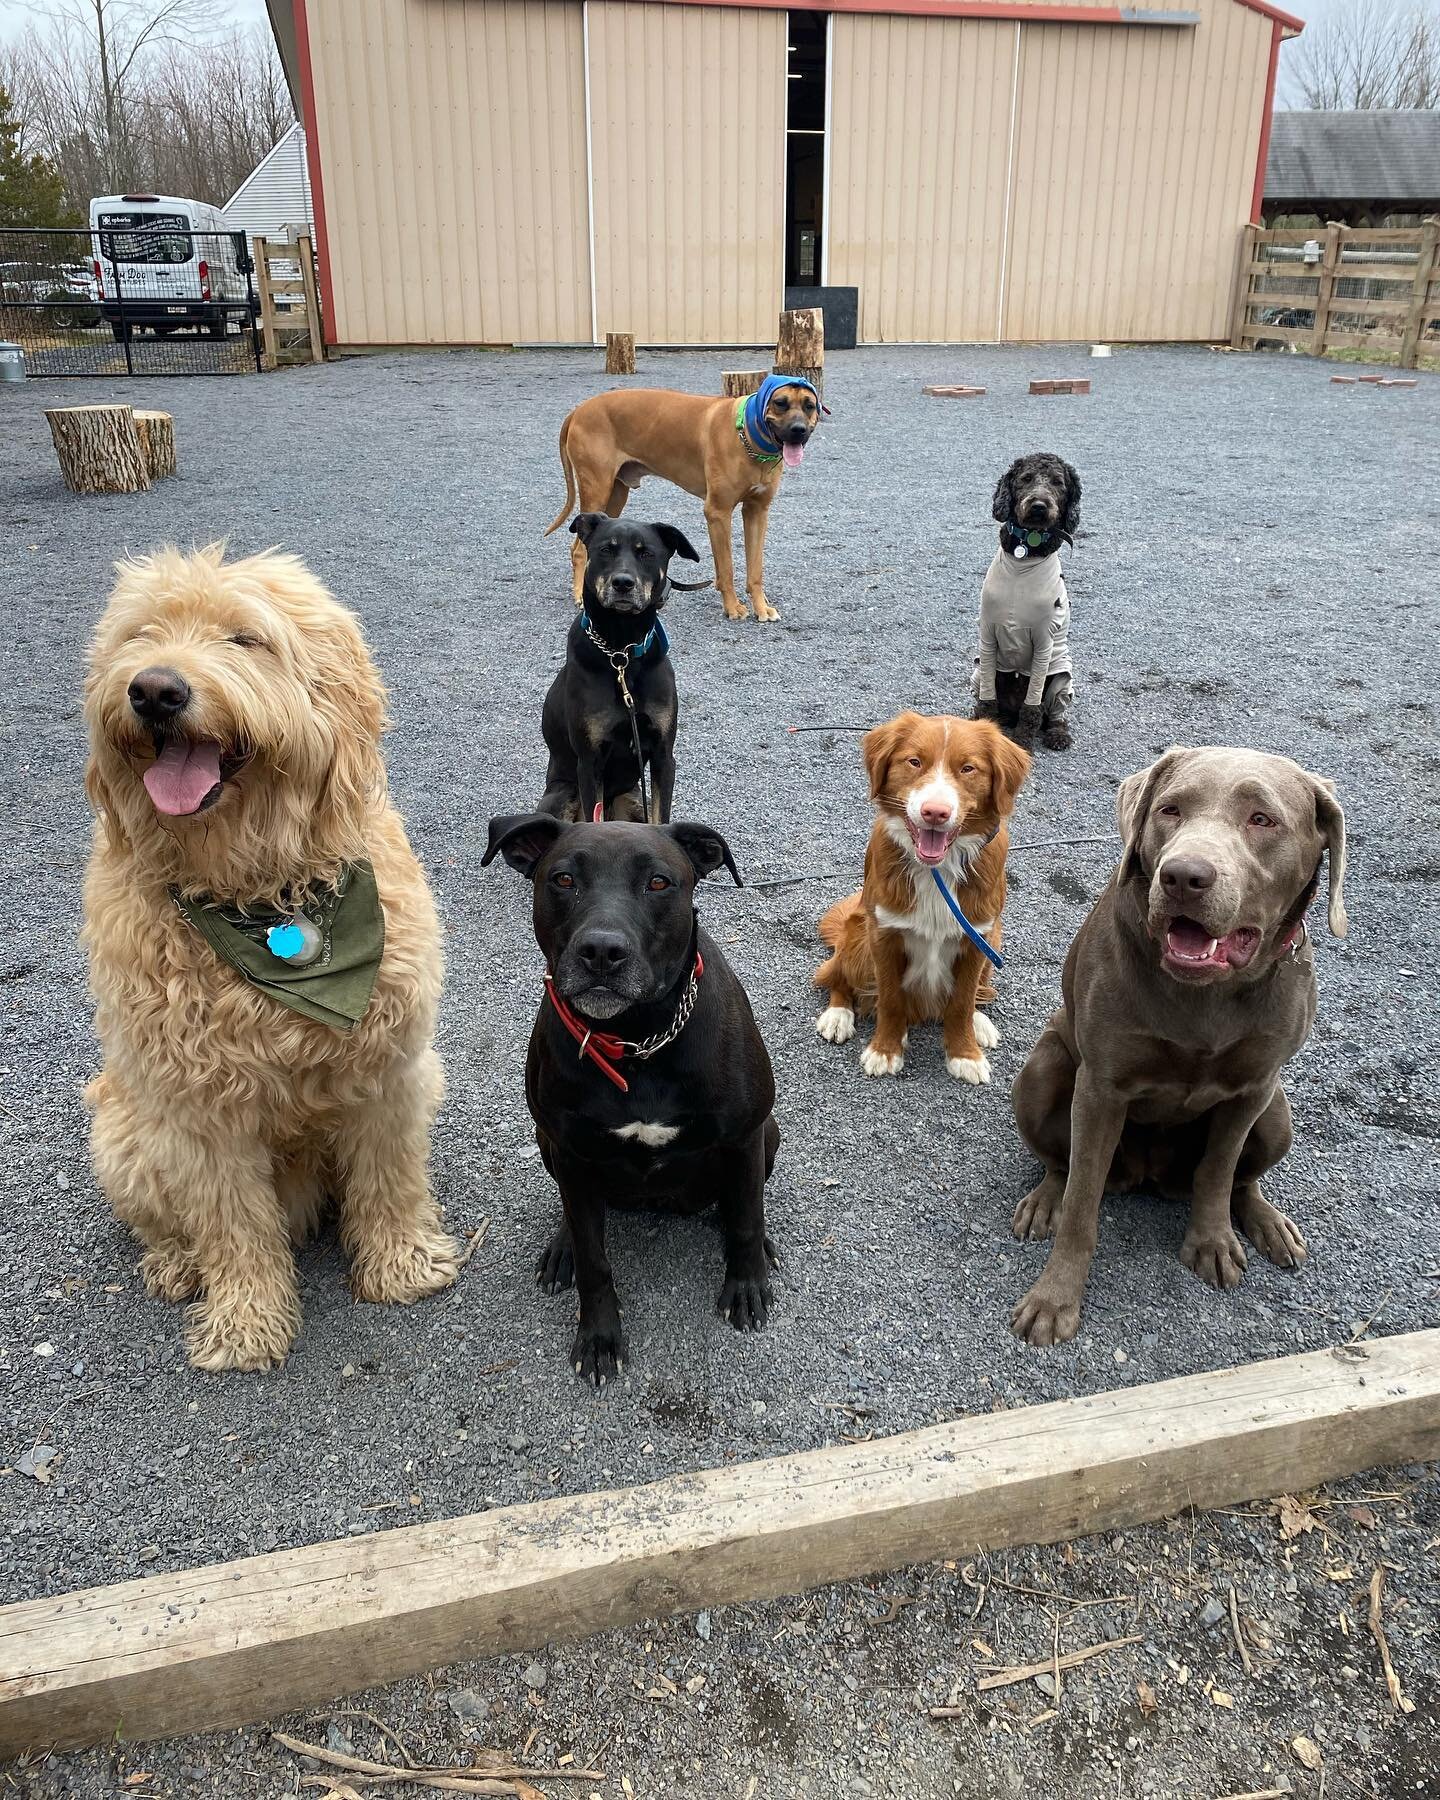 Patient Pack Members waiting to be released to hike! #beafarmdog #farmdogadventures #opbarks 

#patientpup #phillydogtraining #phillydogs #dogsofphilly #dogsofmanayunk #phillypup #dogsocialization #adventuredog